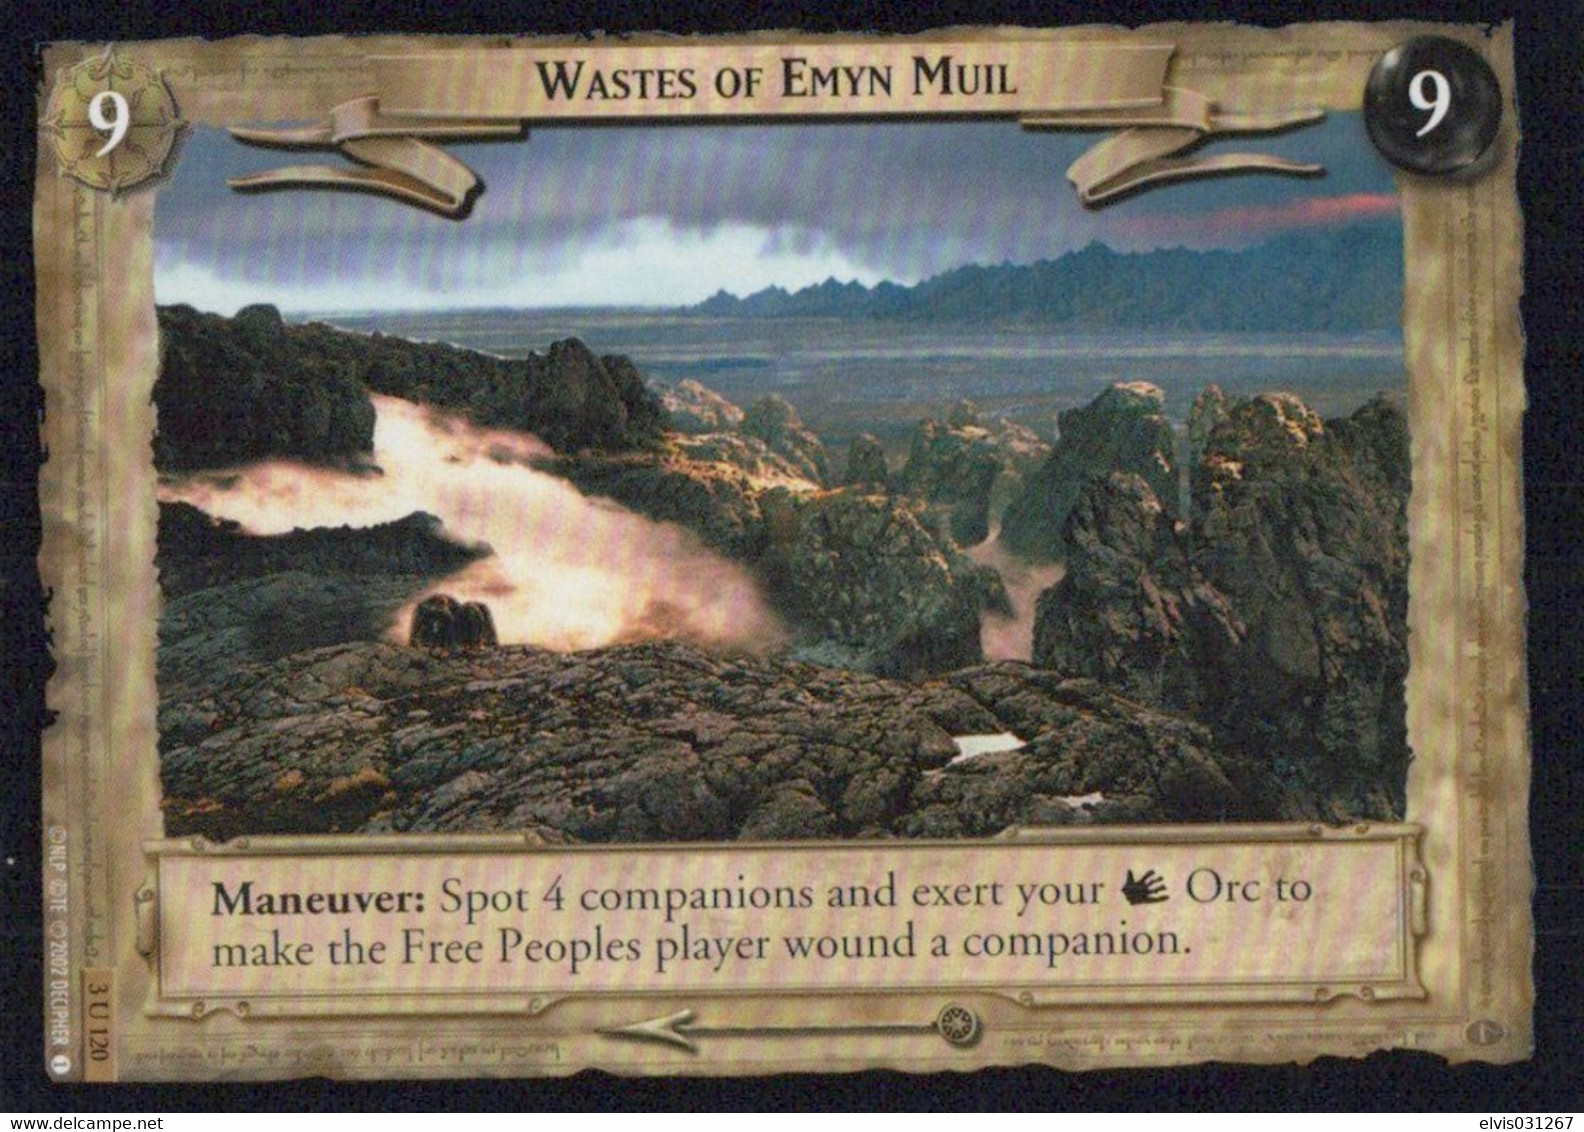 Vintage The Lord Of The Rings: #9-9 Wastes Of Emyn Muil - EN - 2001-2004 - Mint Condition - Trading Card Game - Herr Der Ringe